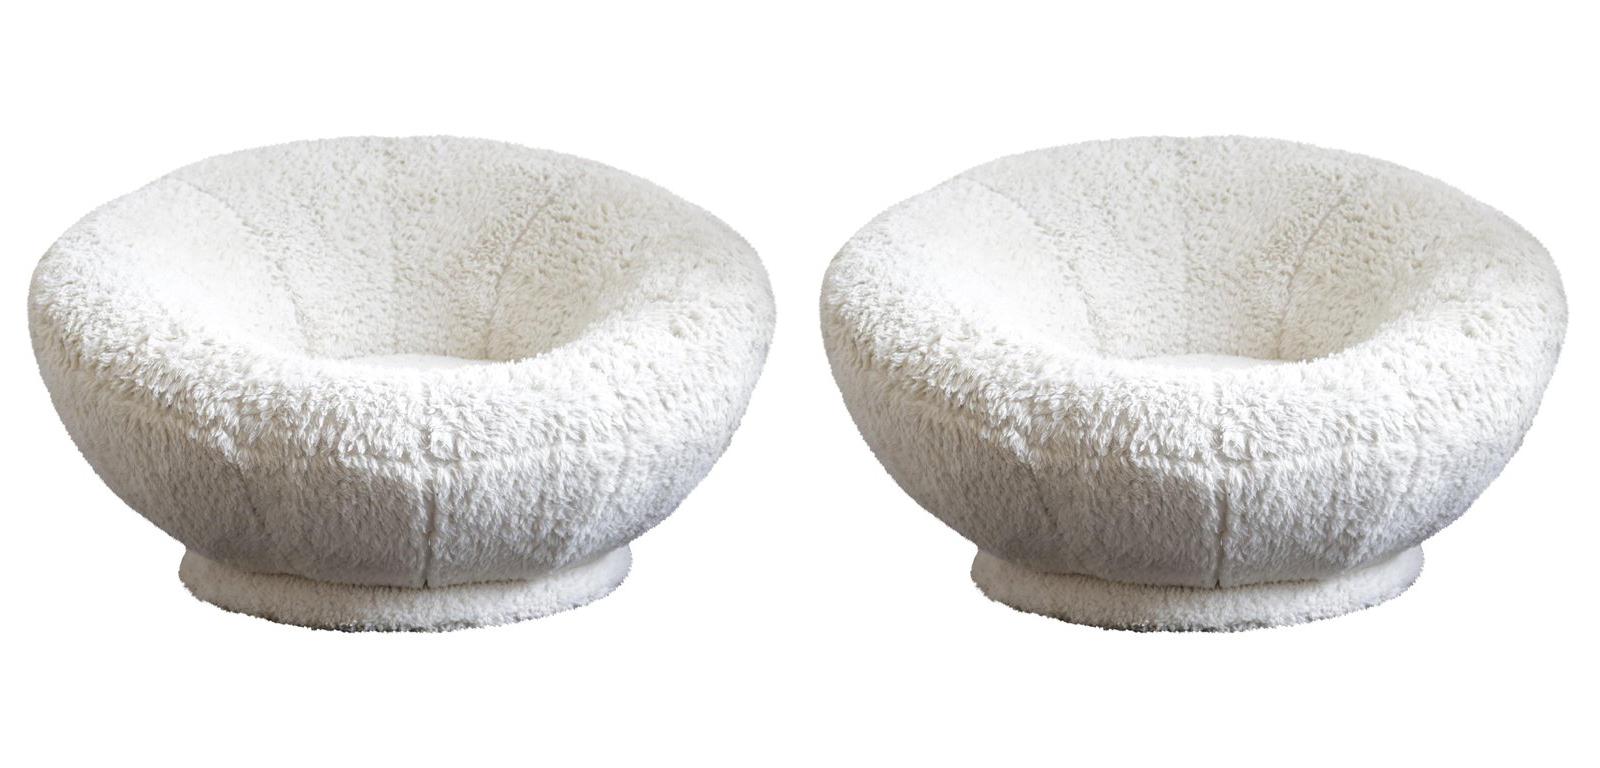 A pair of plush fabric mushroom chairs.
The front of the seat is 12